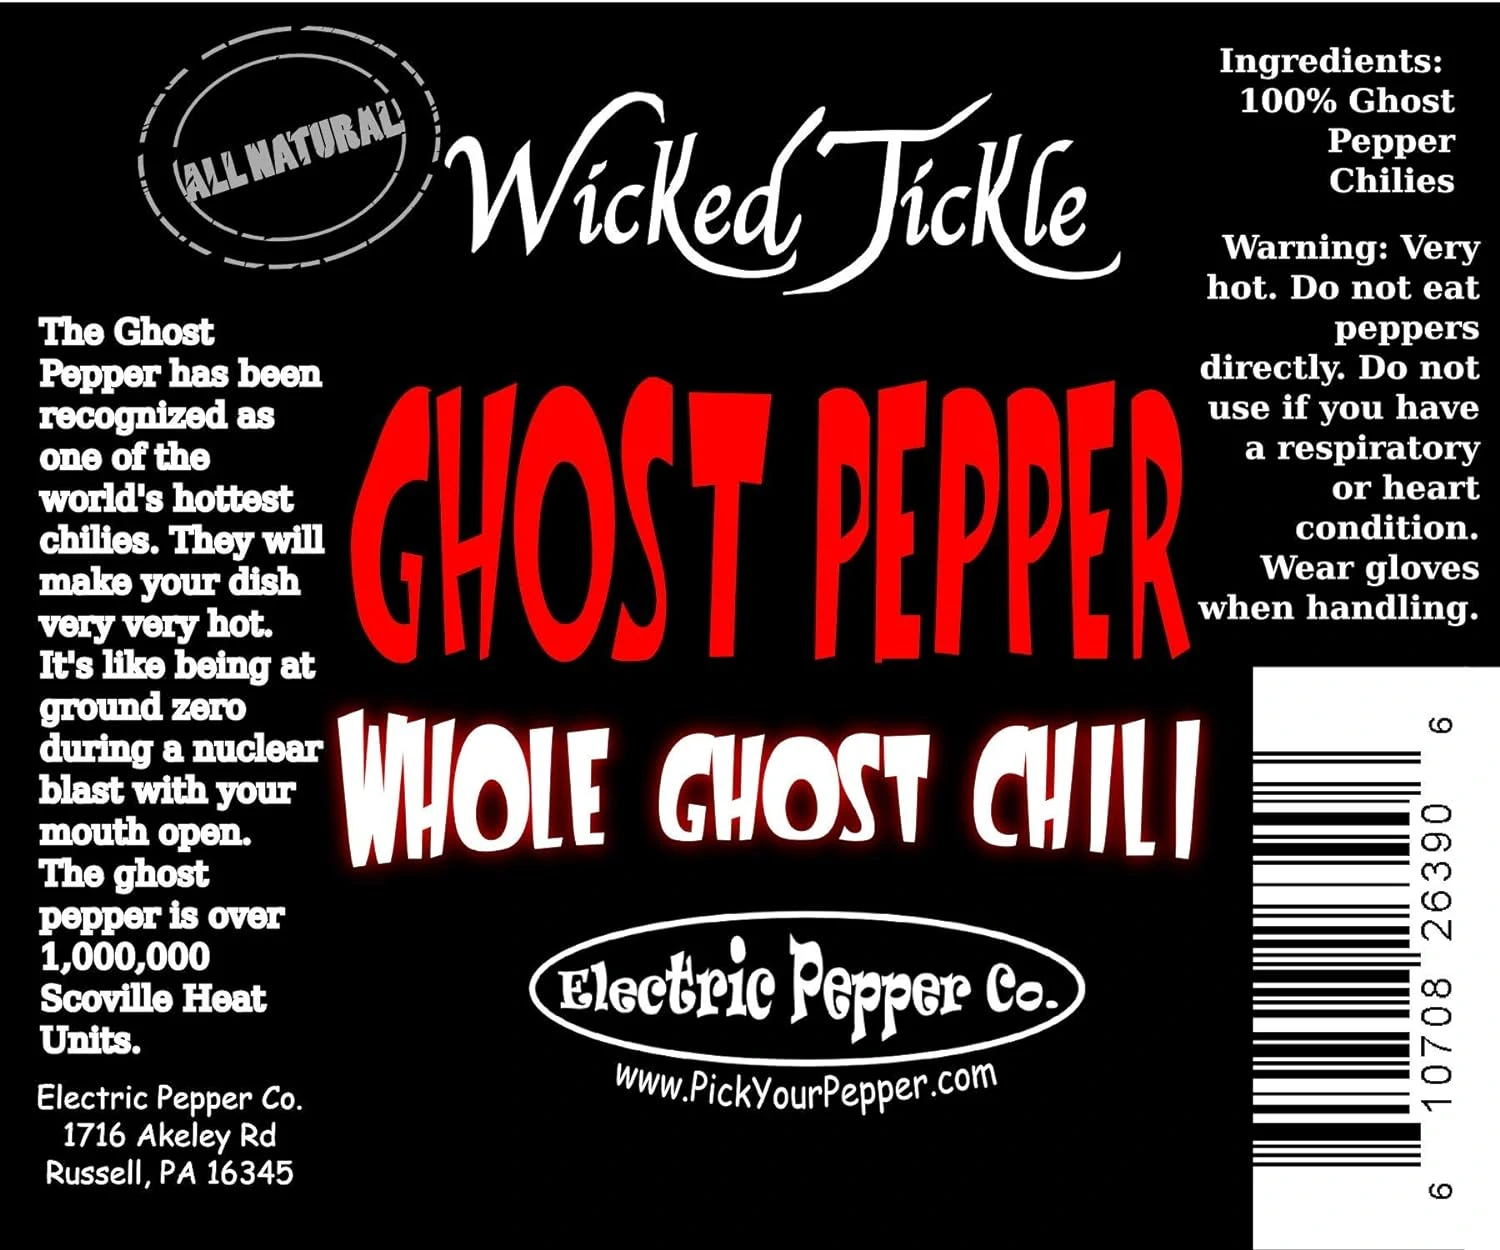 Product Label For Wicked Tickle Ghost Peppers - 
25 Count Bag